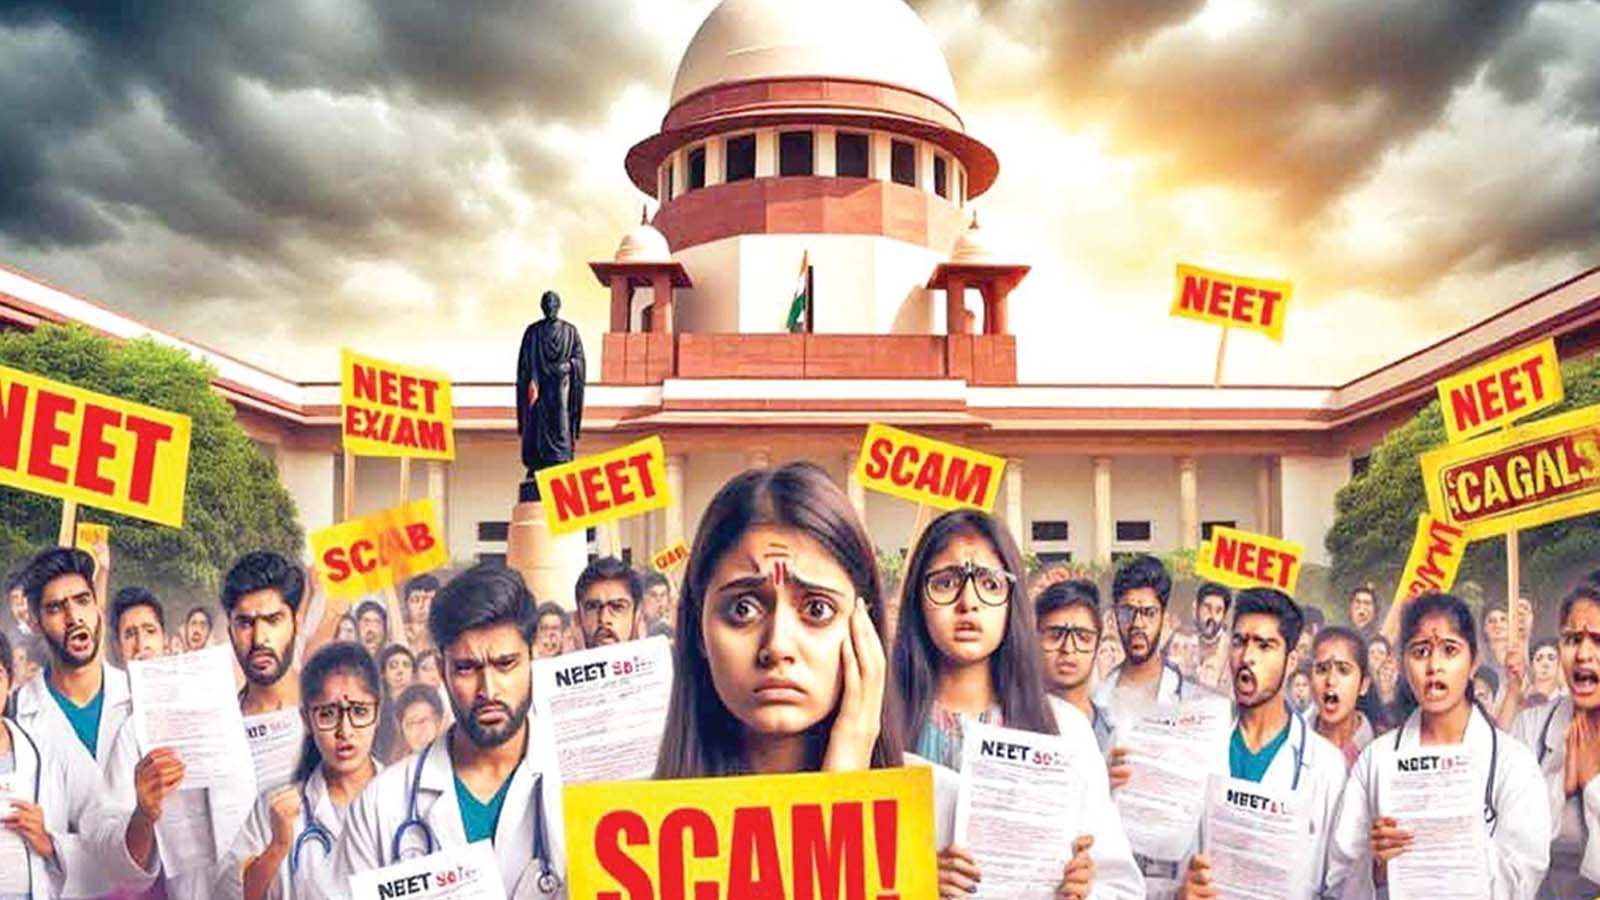 NEET Scam and Its Sociological Implications